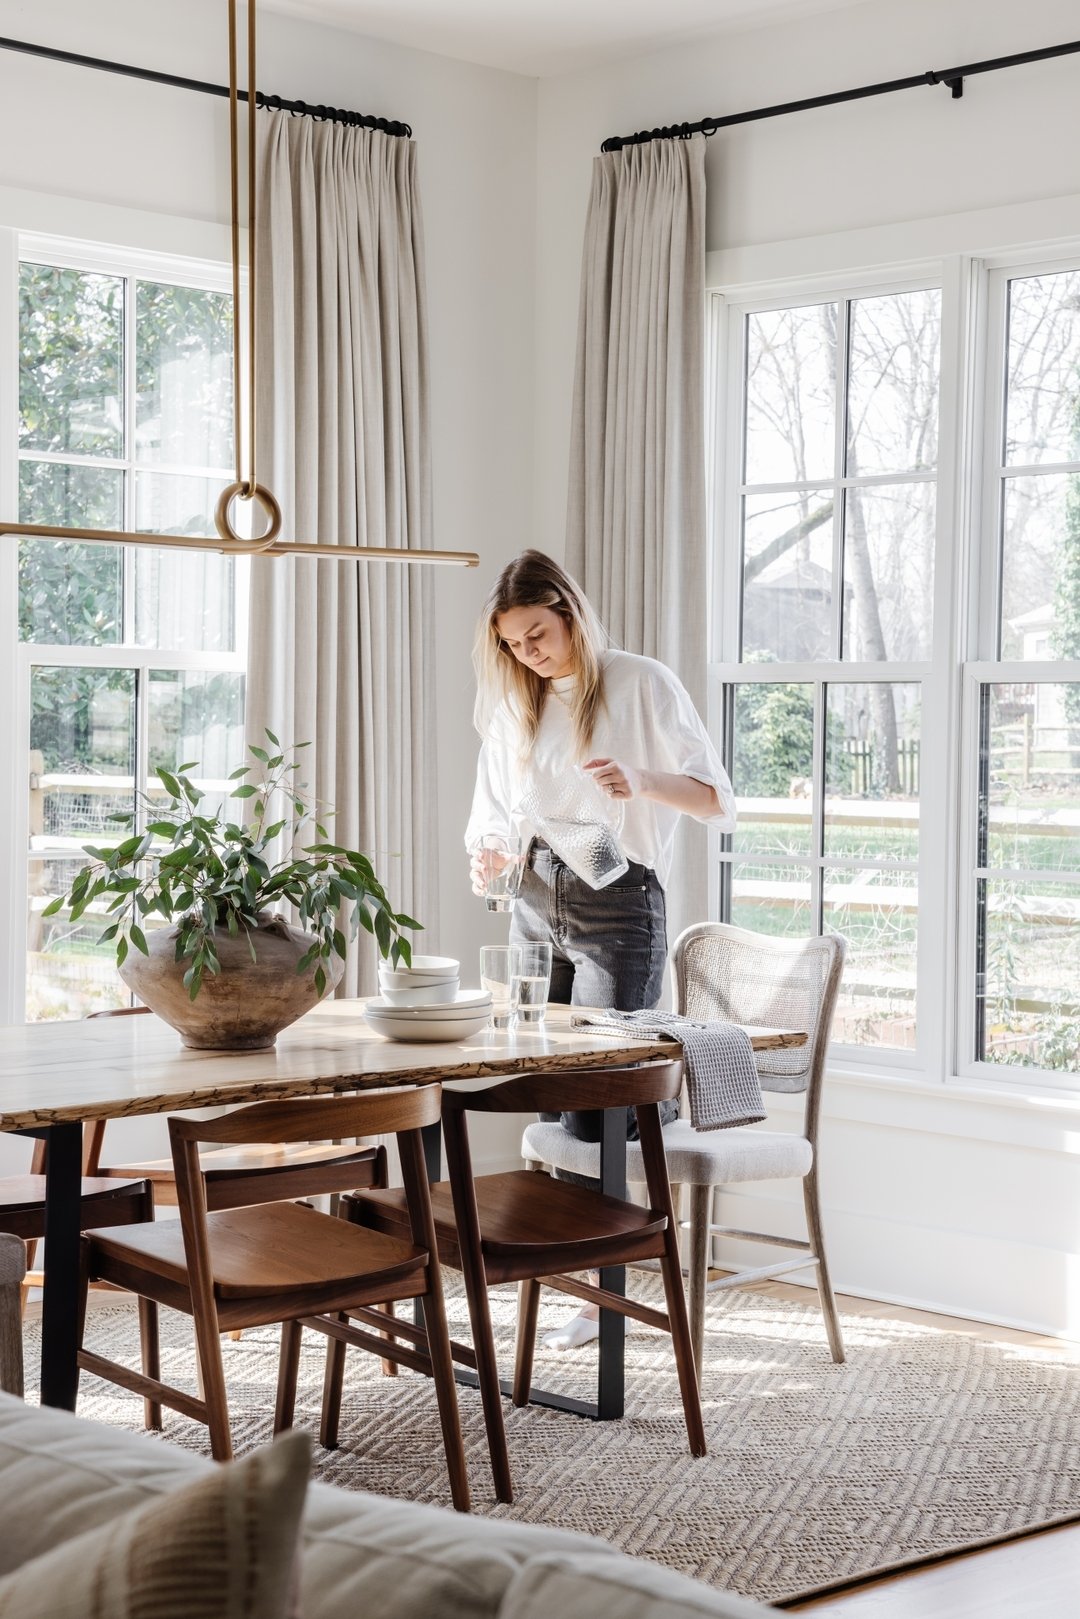 Let's create a home made for hosting and community 🌿 Click the link in our bio to tell us about your project!

#perchinteriors #houseinspiration #interiordesign #interiors #cltdesign #charlotteinteriordesign